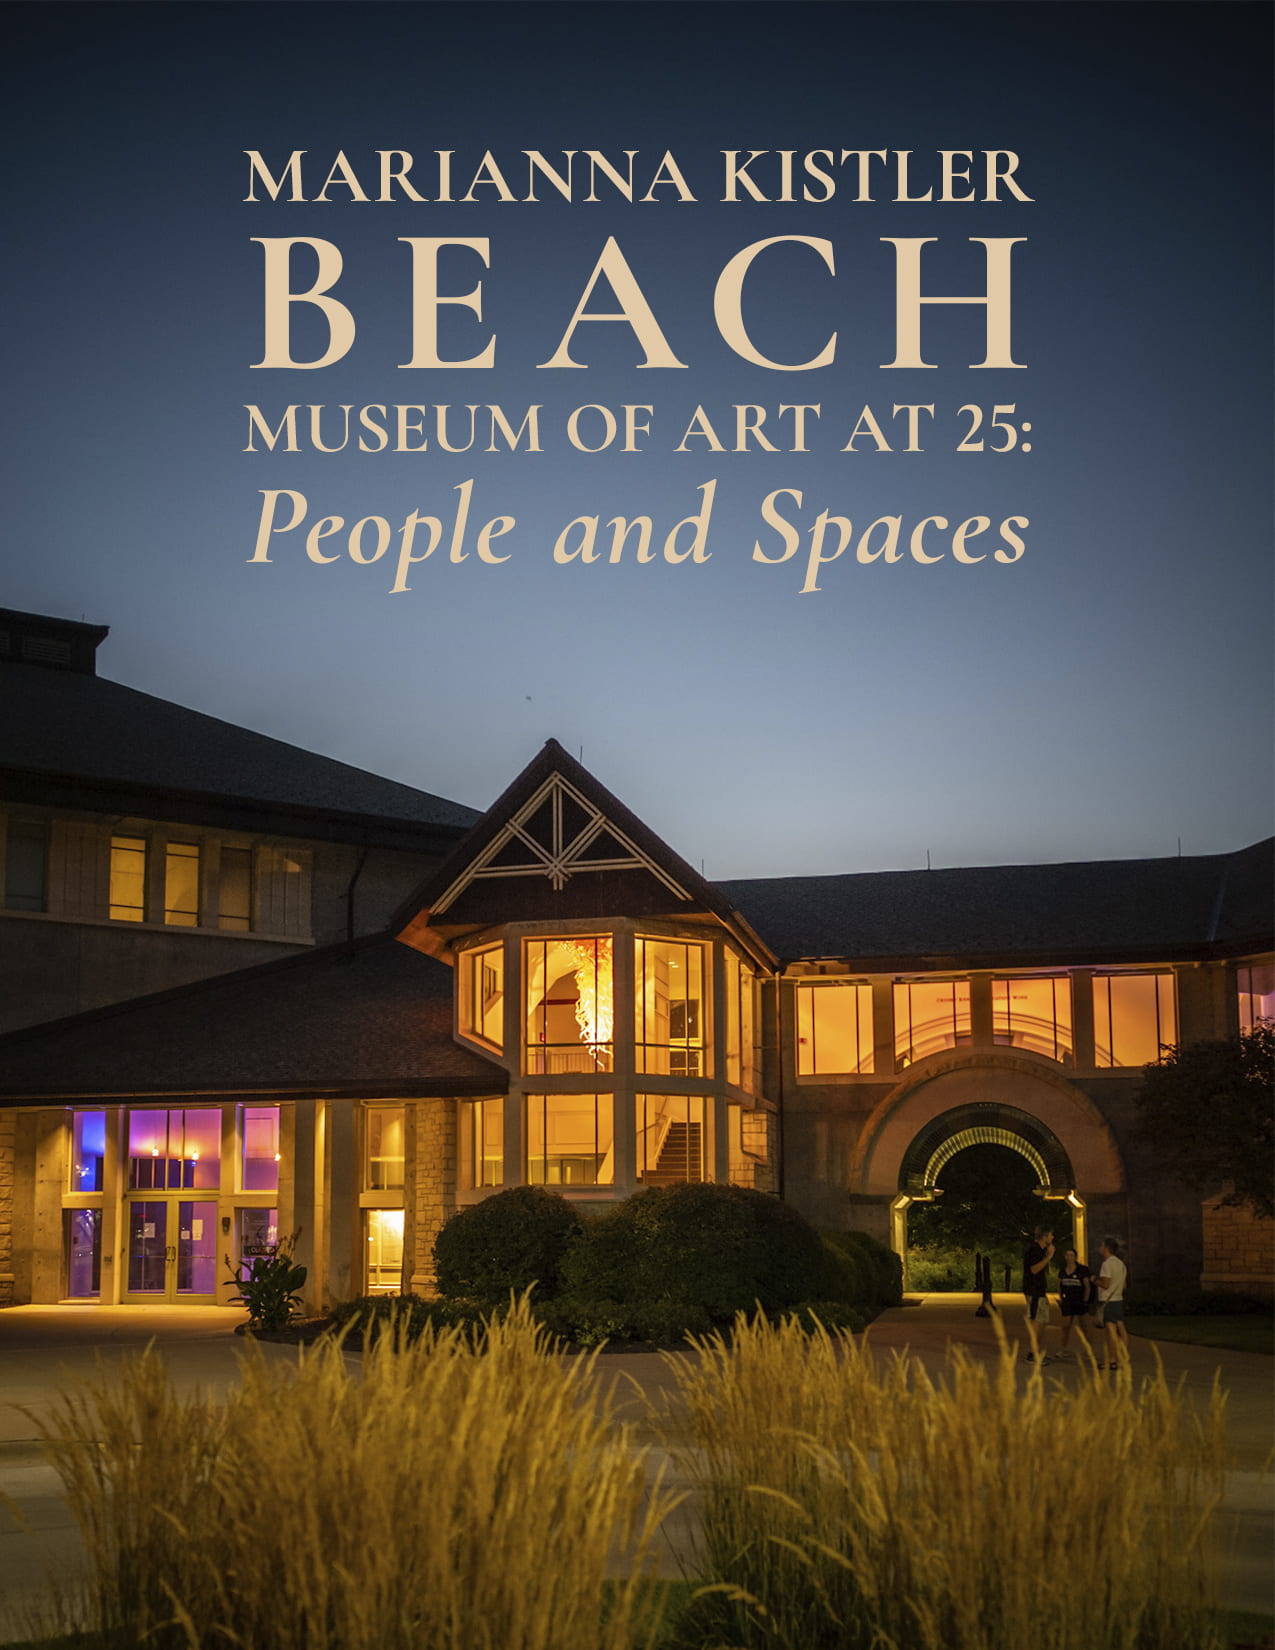 E-book cover: "Marianna Kistler Beach Museum of Art at 25: People and Spaces"